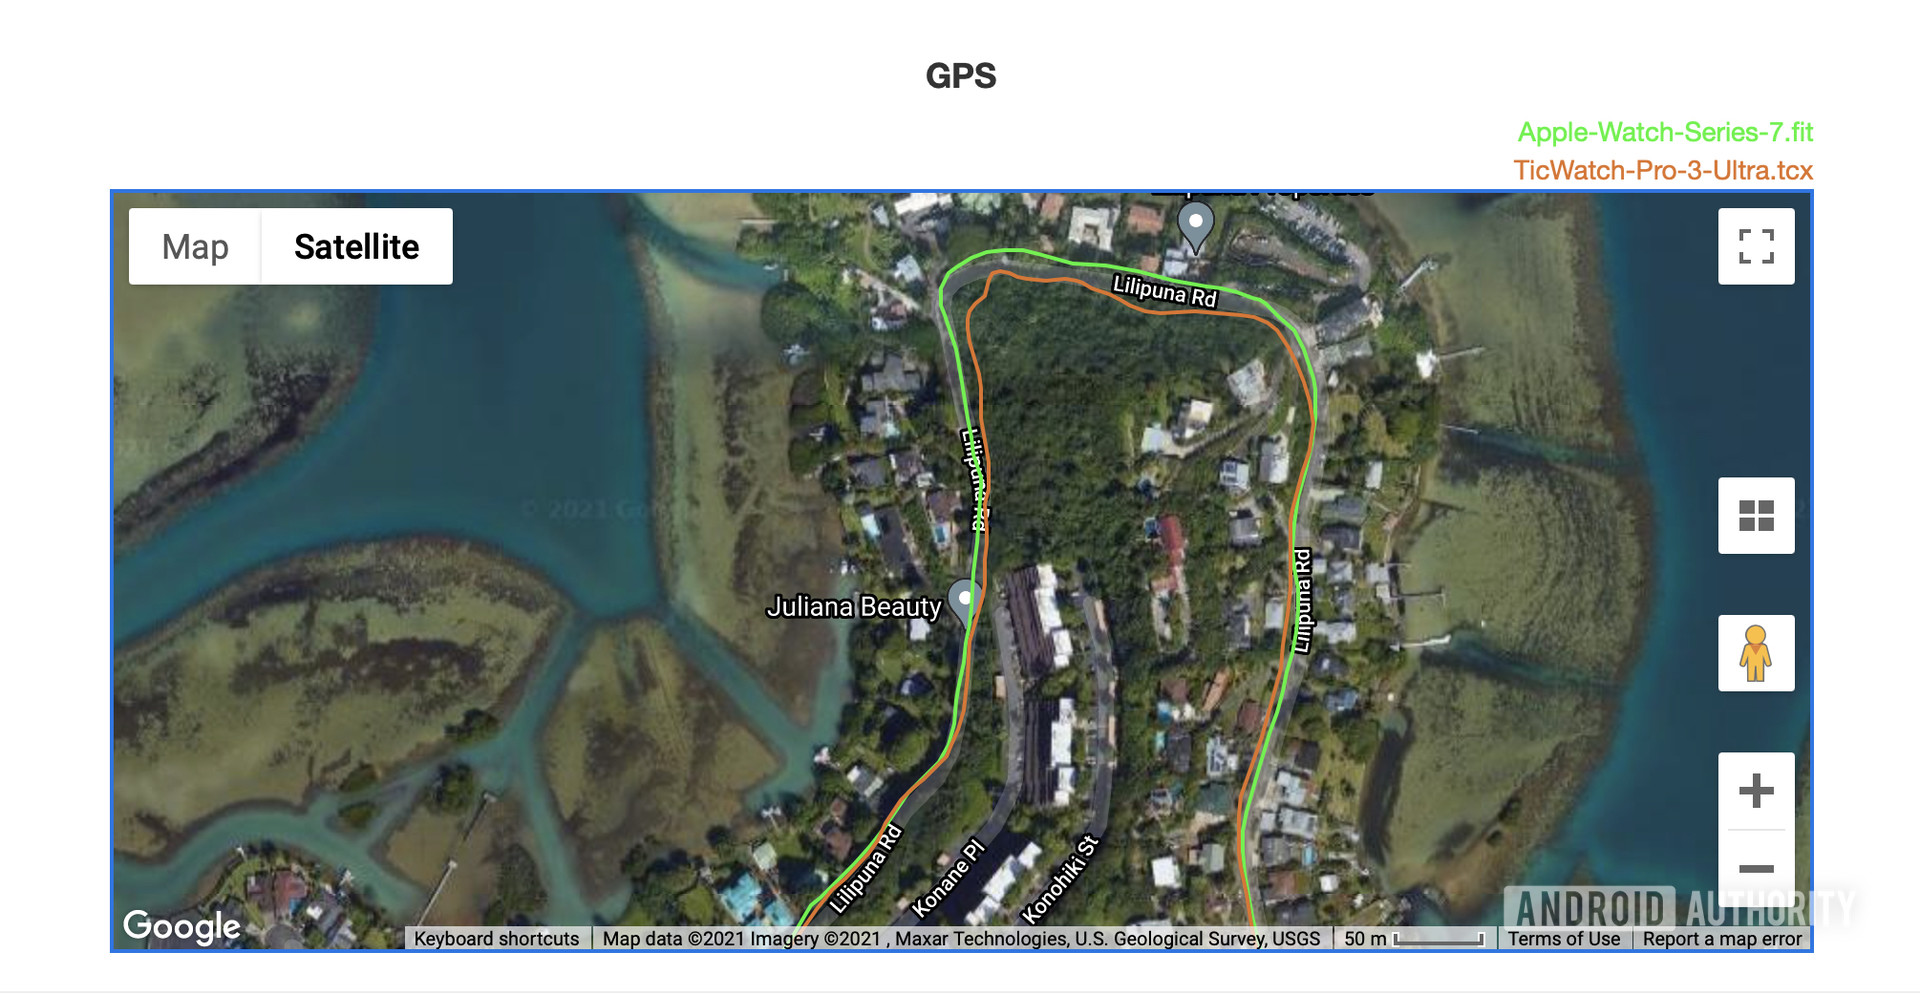 A screenshot of TicWatch Pro 3 Ultra GPS data shows the device's accuracy struggling on a hillside.